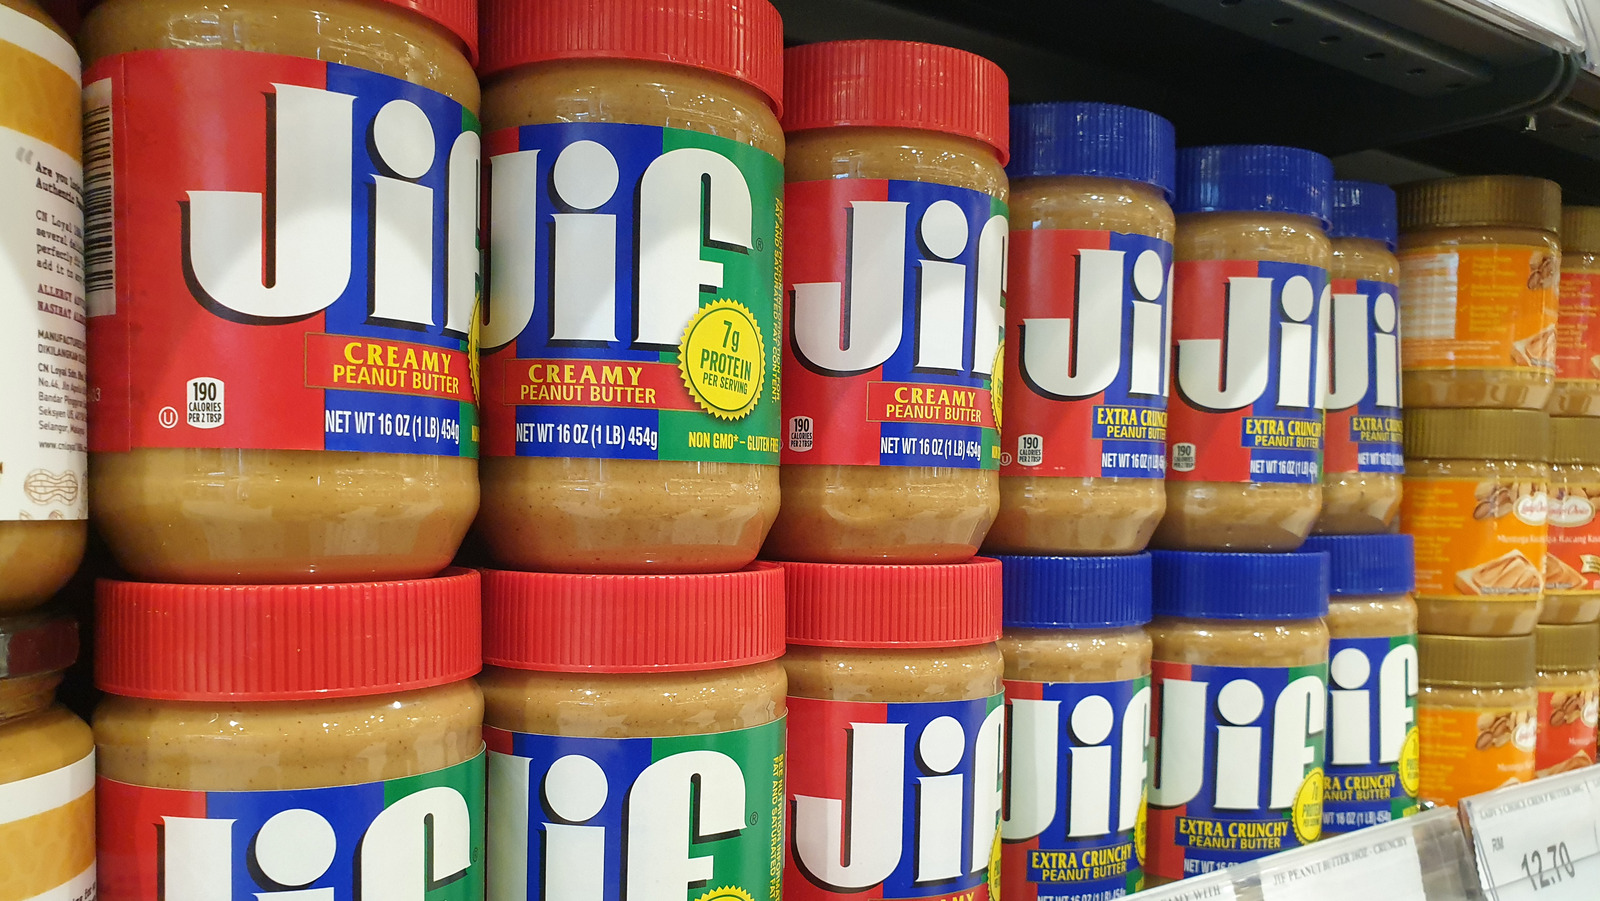 What You Should Know About The Jif Peanut Butter Recall